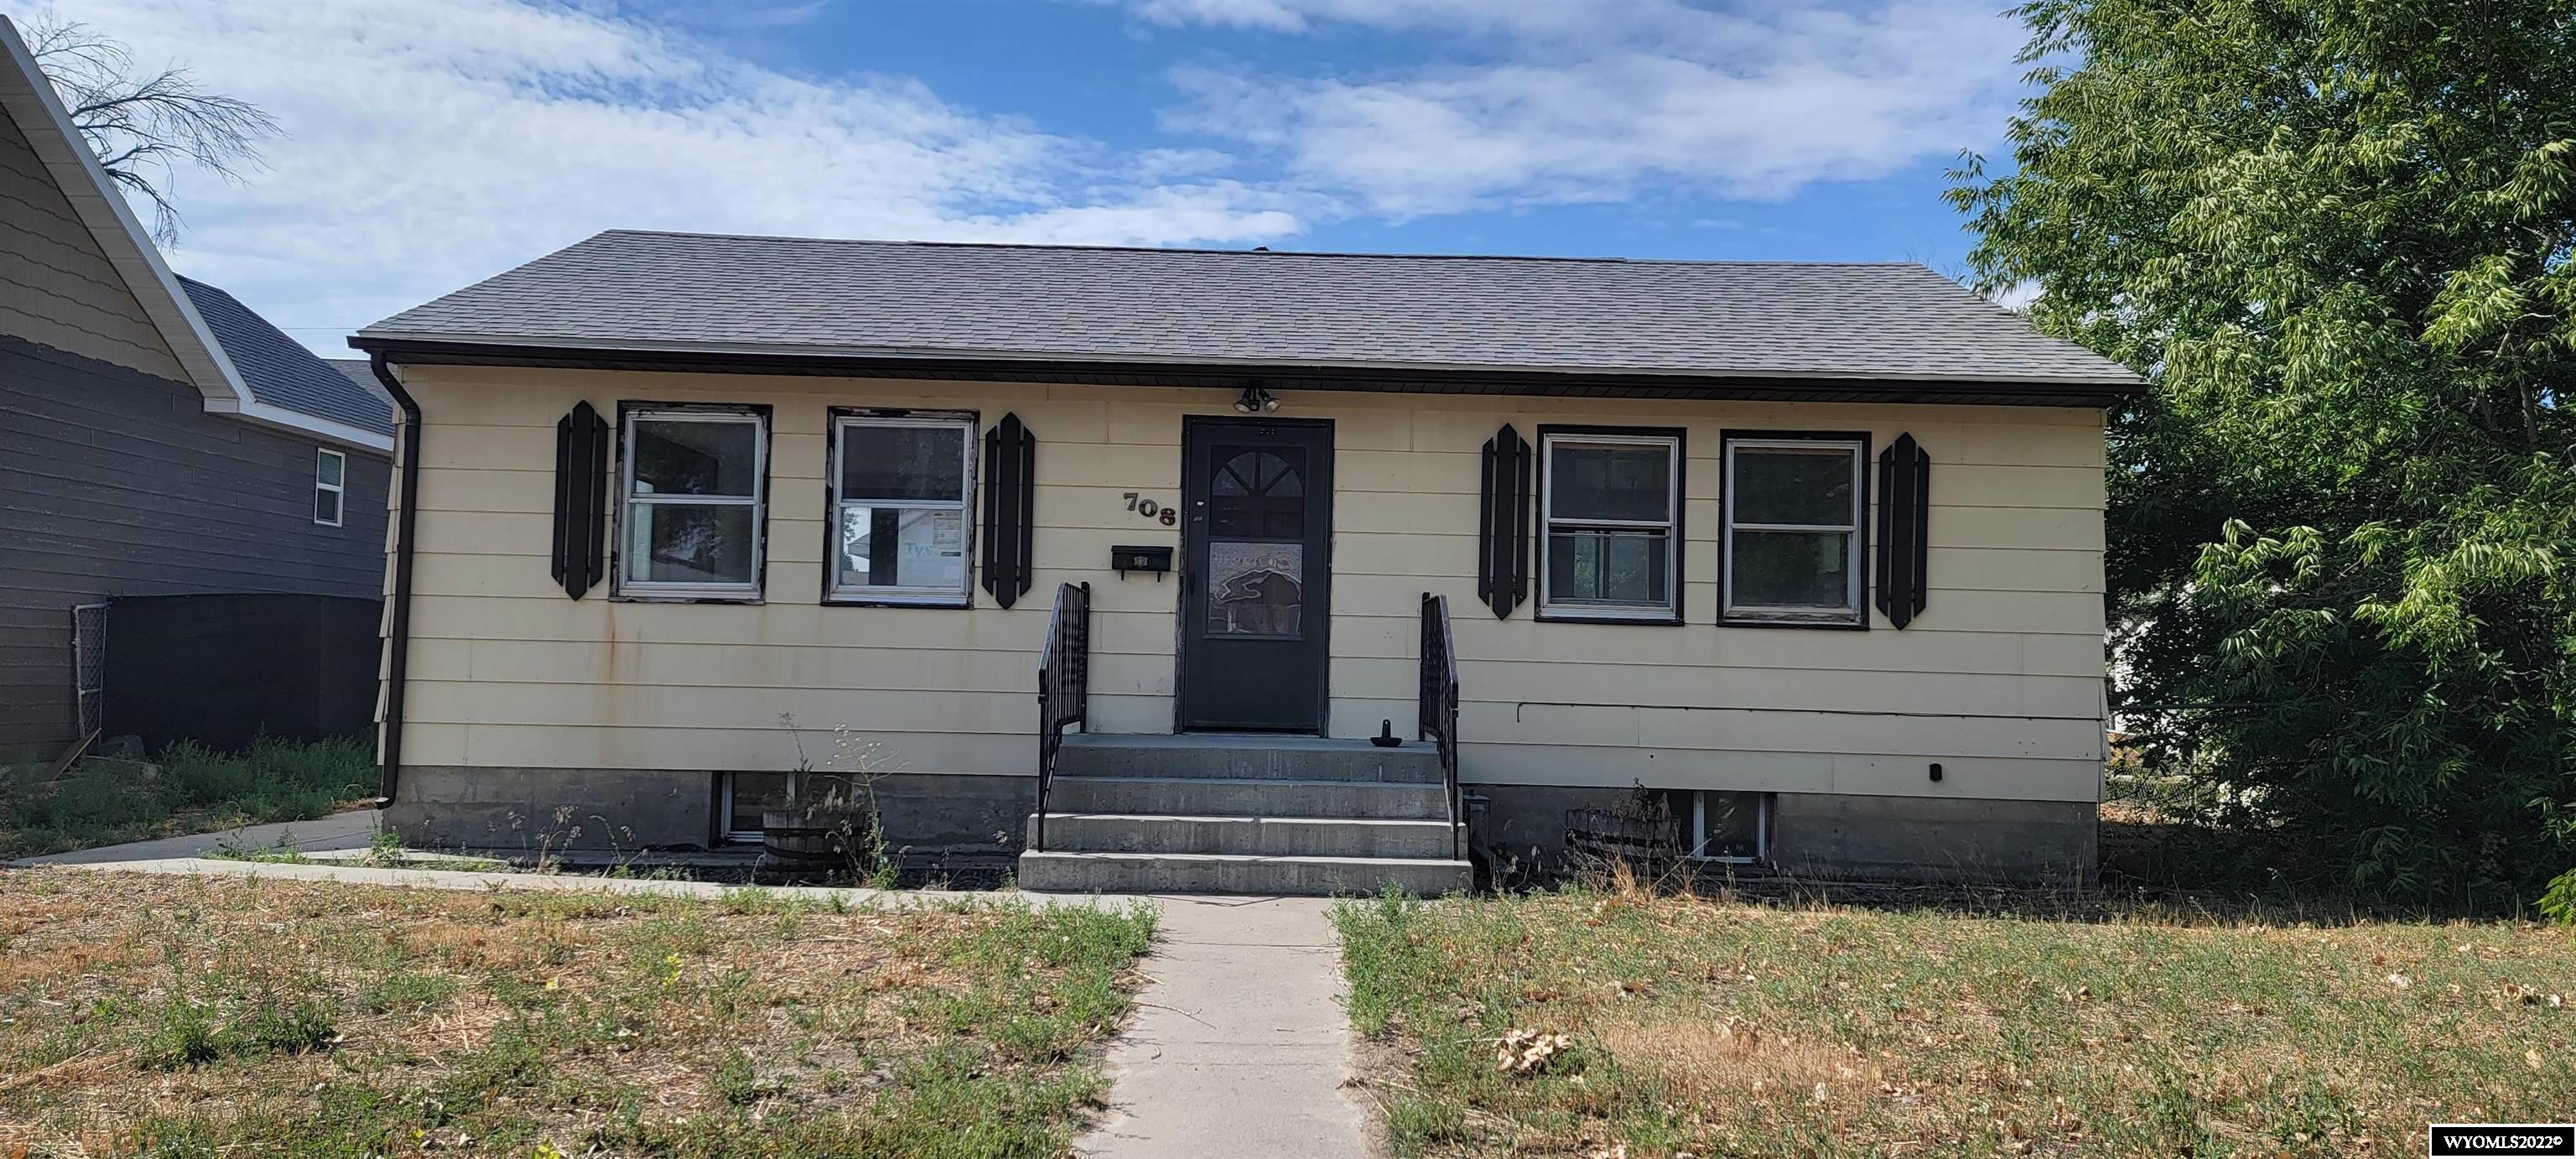 Looking for a house to FLIP!!!  Stop right now, this is what you have been waiting for.  The house is completely gutted and ready for a contractor.  There is a brand new 3-car garage with a 728 sq. ft. loft.  Newer Architectural Roof!